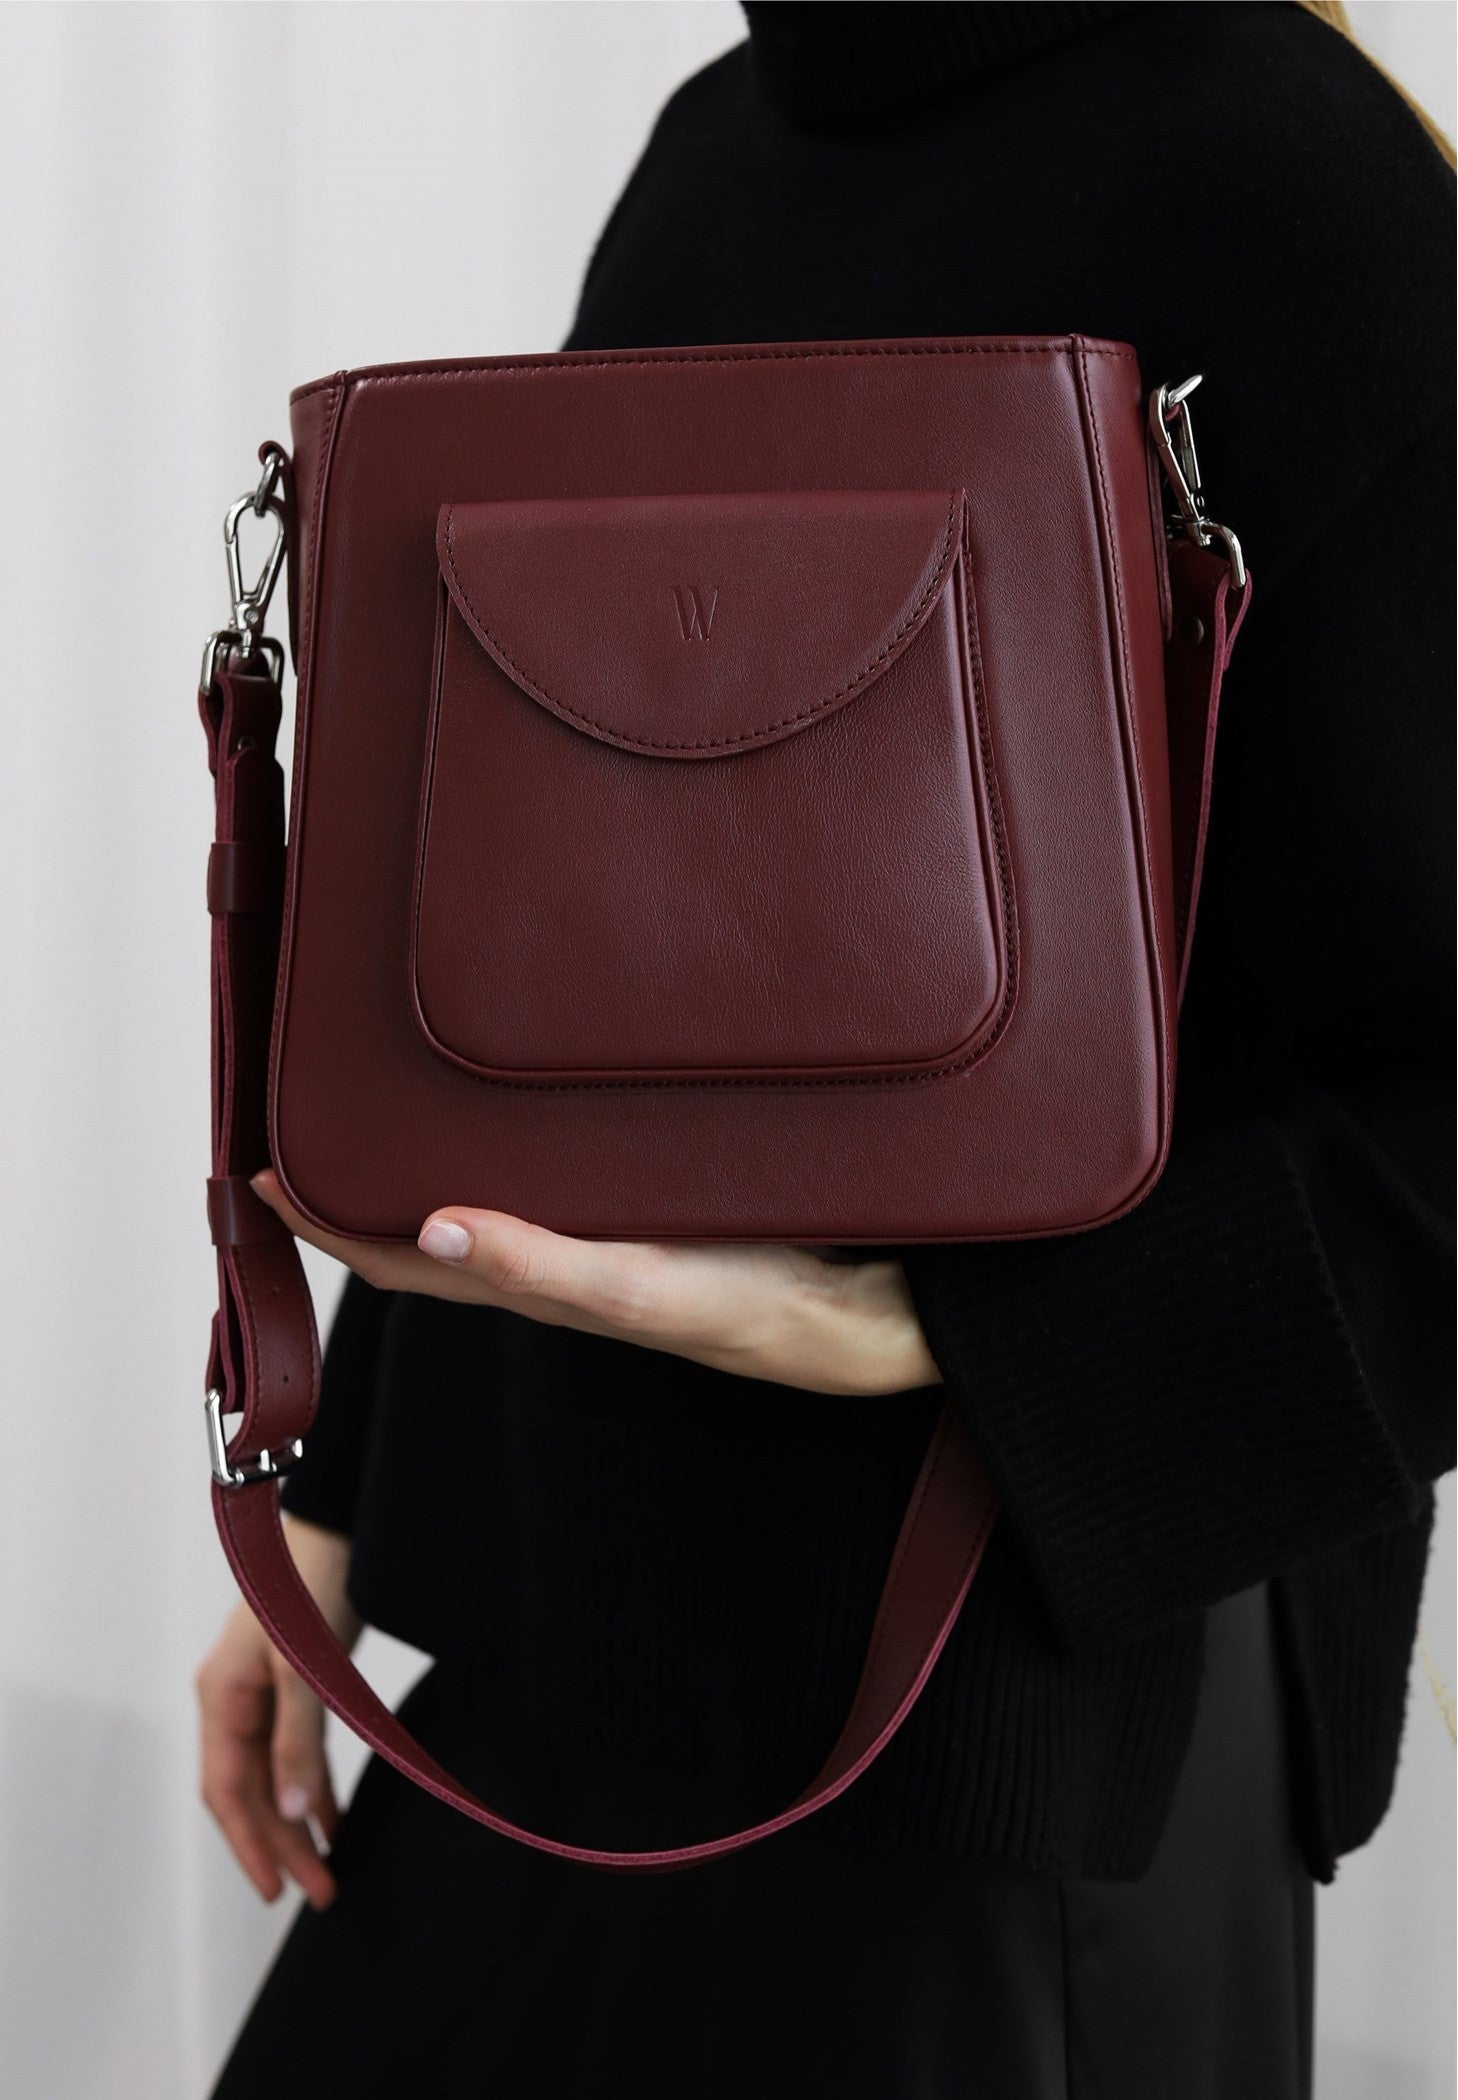 leather bag for women in marsala color